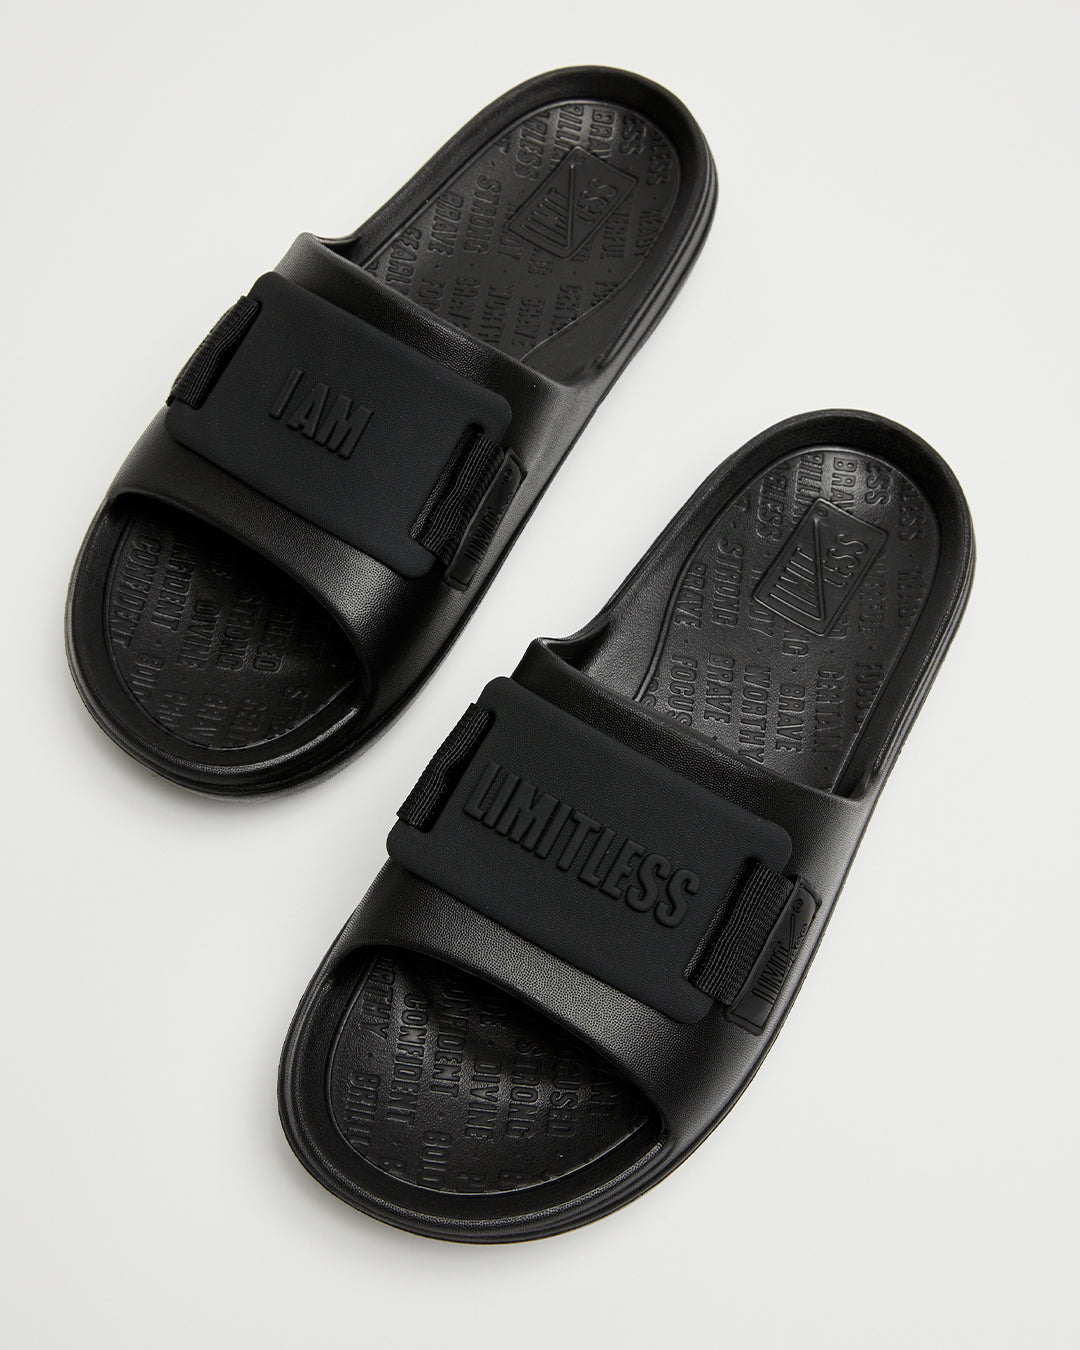 LIMITLESS SLIDES™ WITH ESSENTIAL TIBAH™ QUAD - MOUNTAIN VIEW HIGH SCHOOL (AZ) EDITION